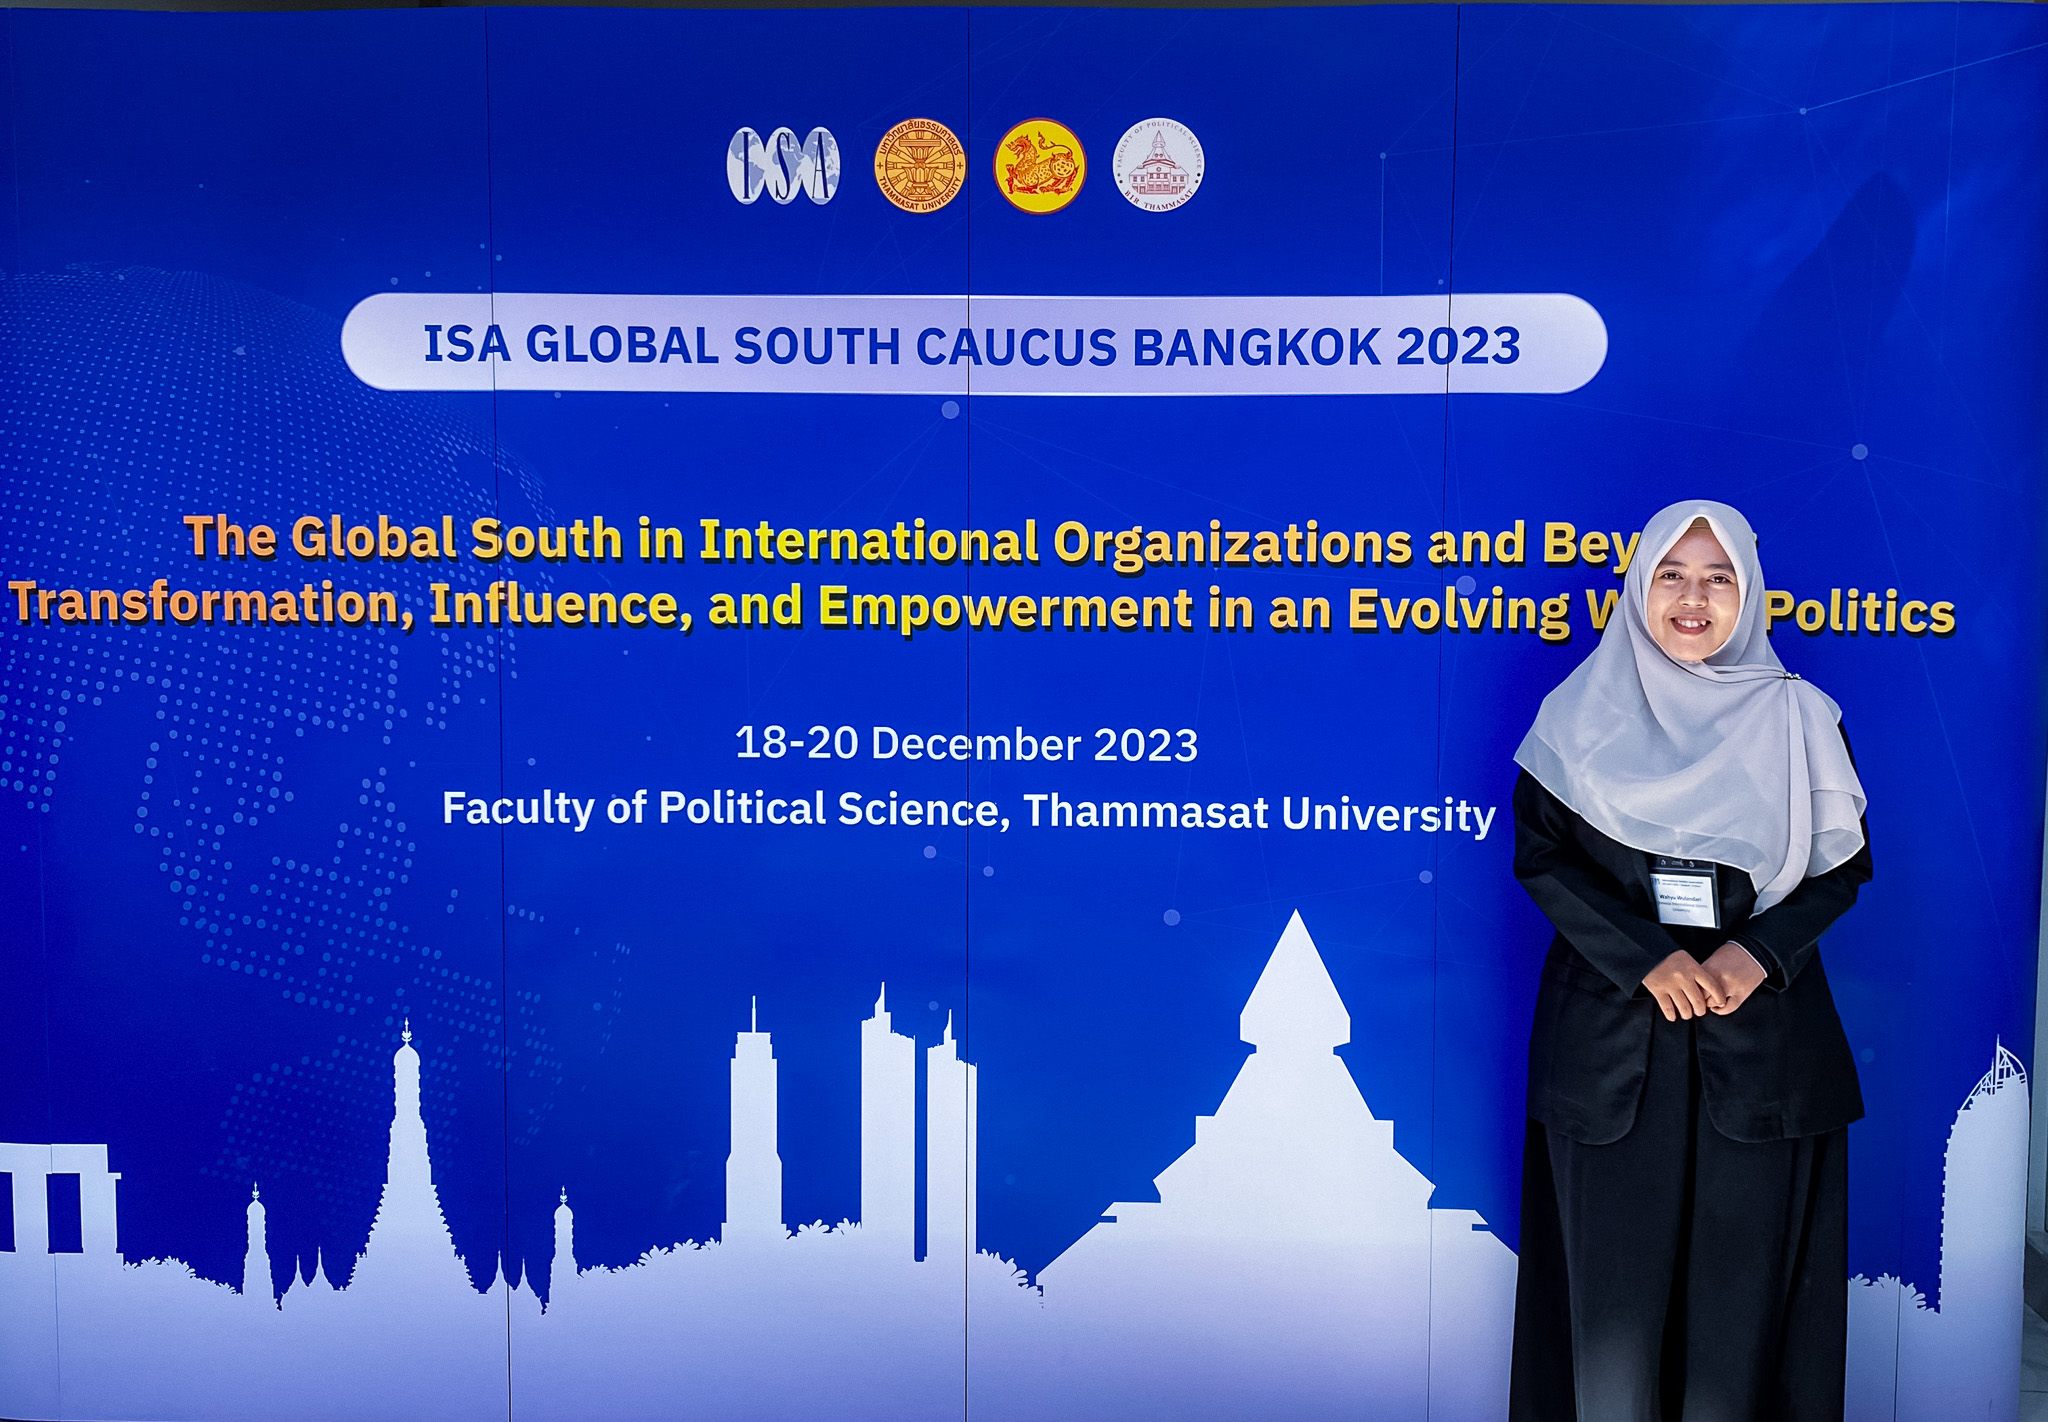 UIII Student Presents Paper on Climate Change at Conference in Thailand